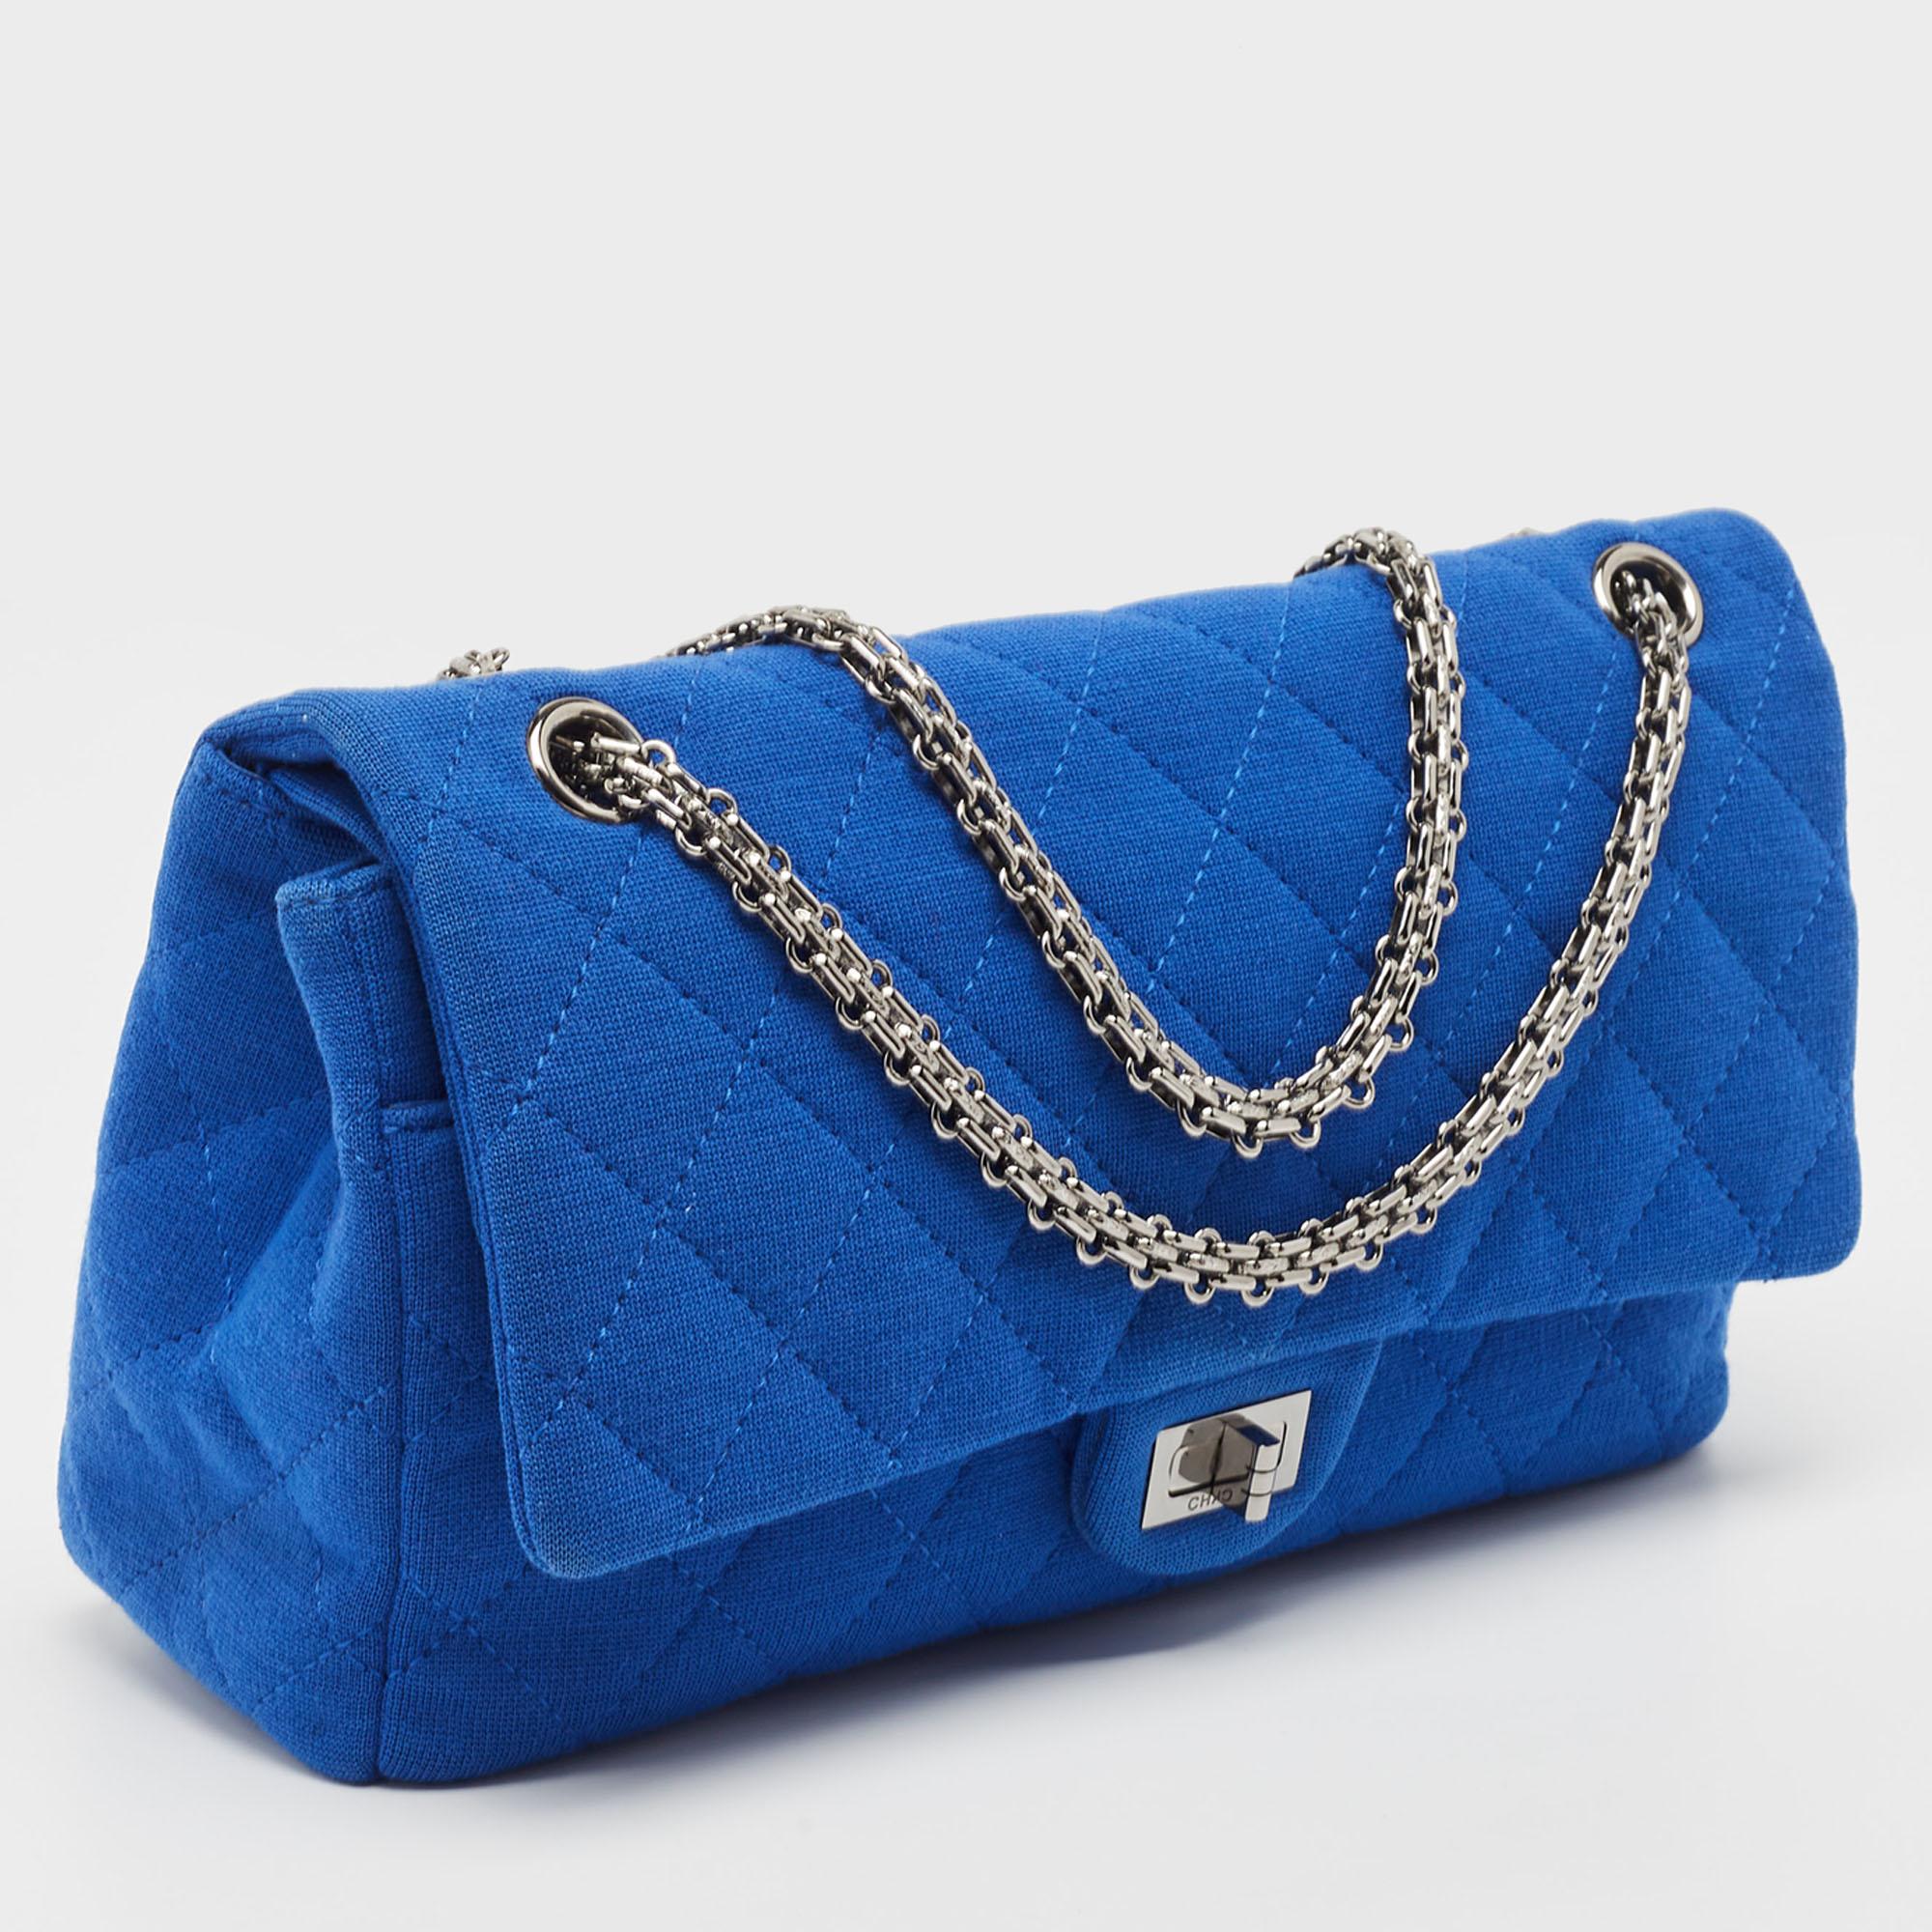 Women's Chanel Blue Quilted Jersey 226 Reissue 2.55 Flap Bag